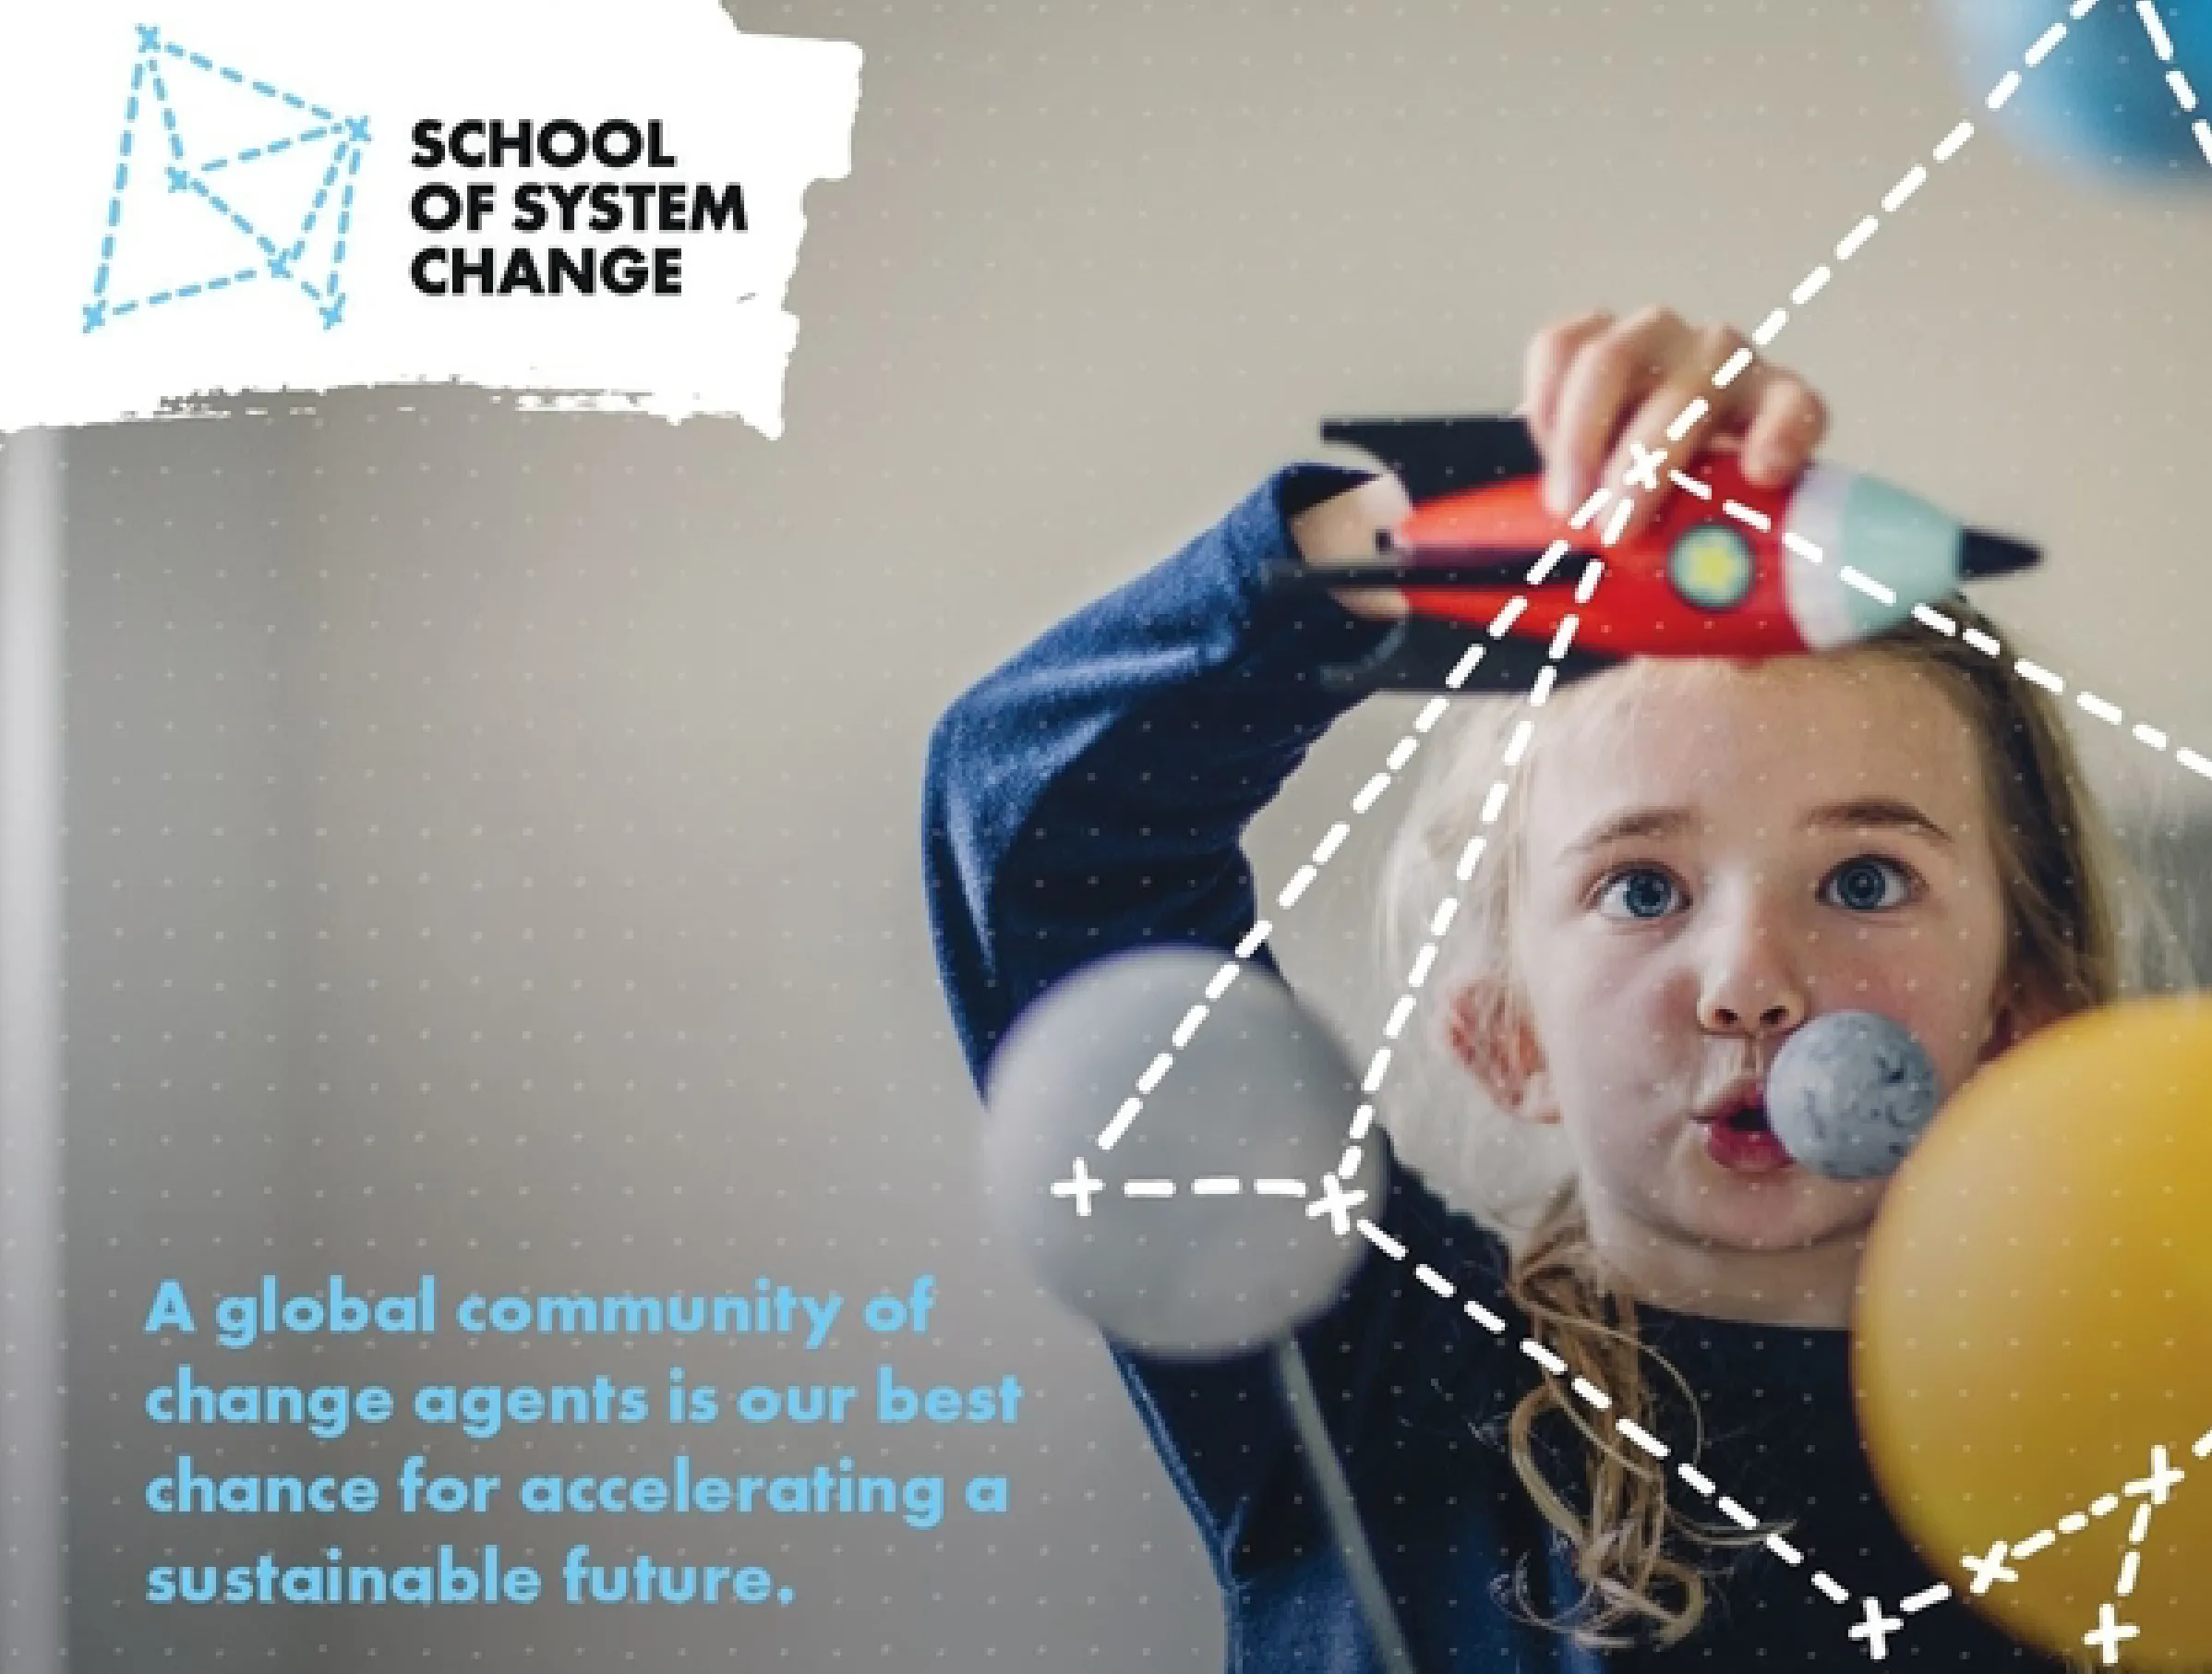 School of System Change branding on prospectus cover featuring a child playing with a model of the planets